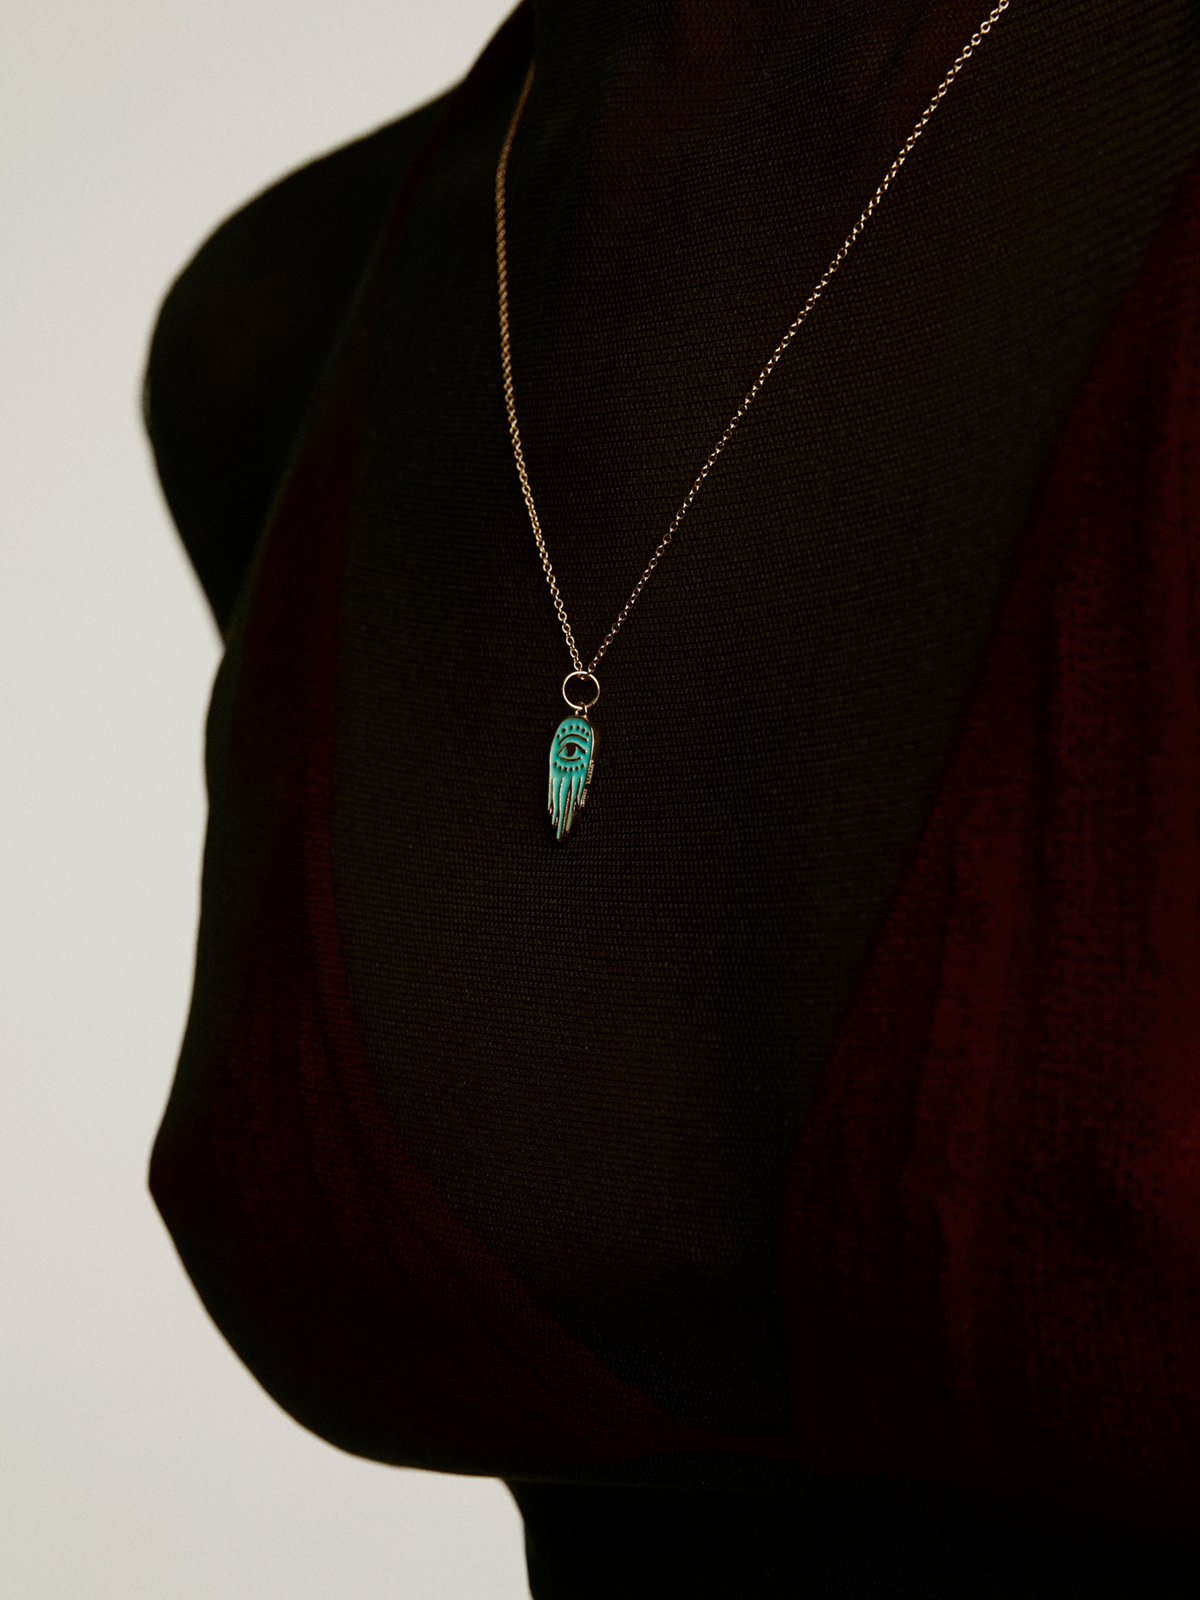 925 Silver charm bathed in 18K yellow gold with turquoise enamel and Hand of Fatima.